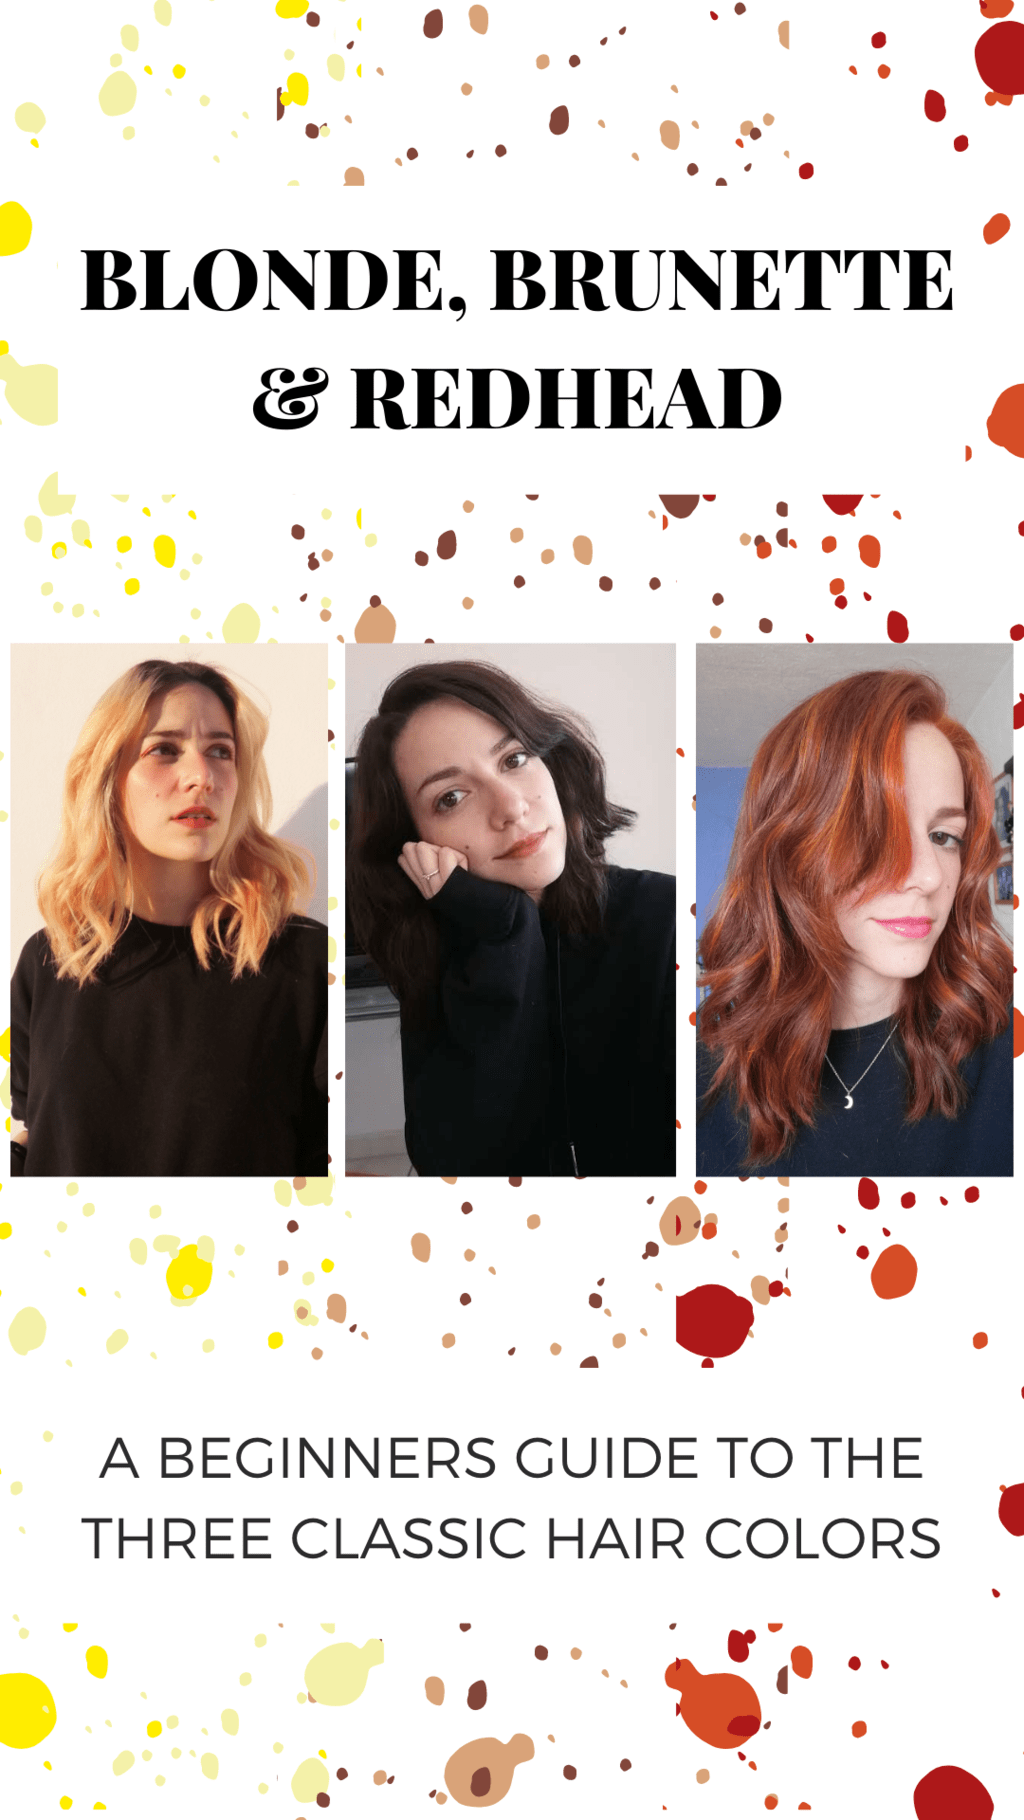 Blonde vs Brunette vs Redhead: My Experience Trying All Three Hair Colors  (+ Tips!) - College Fashion